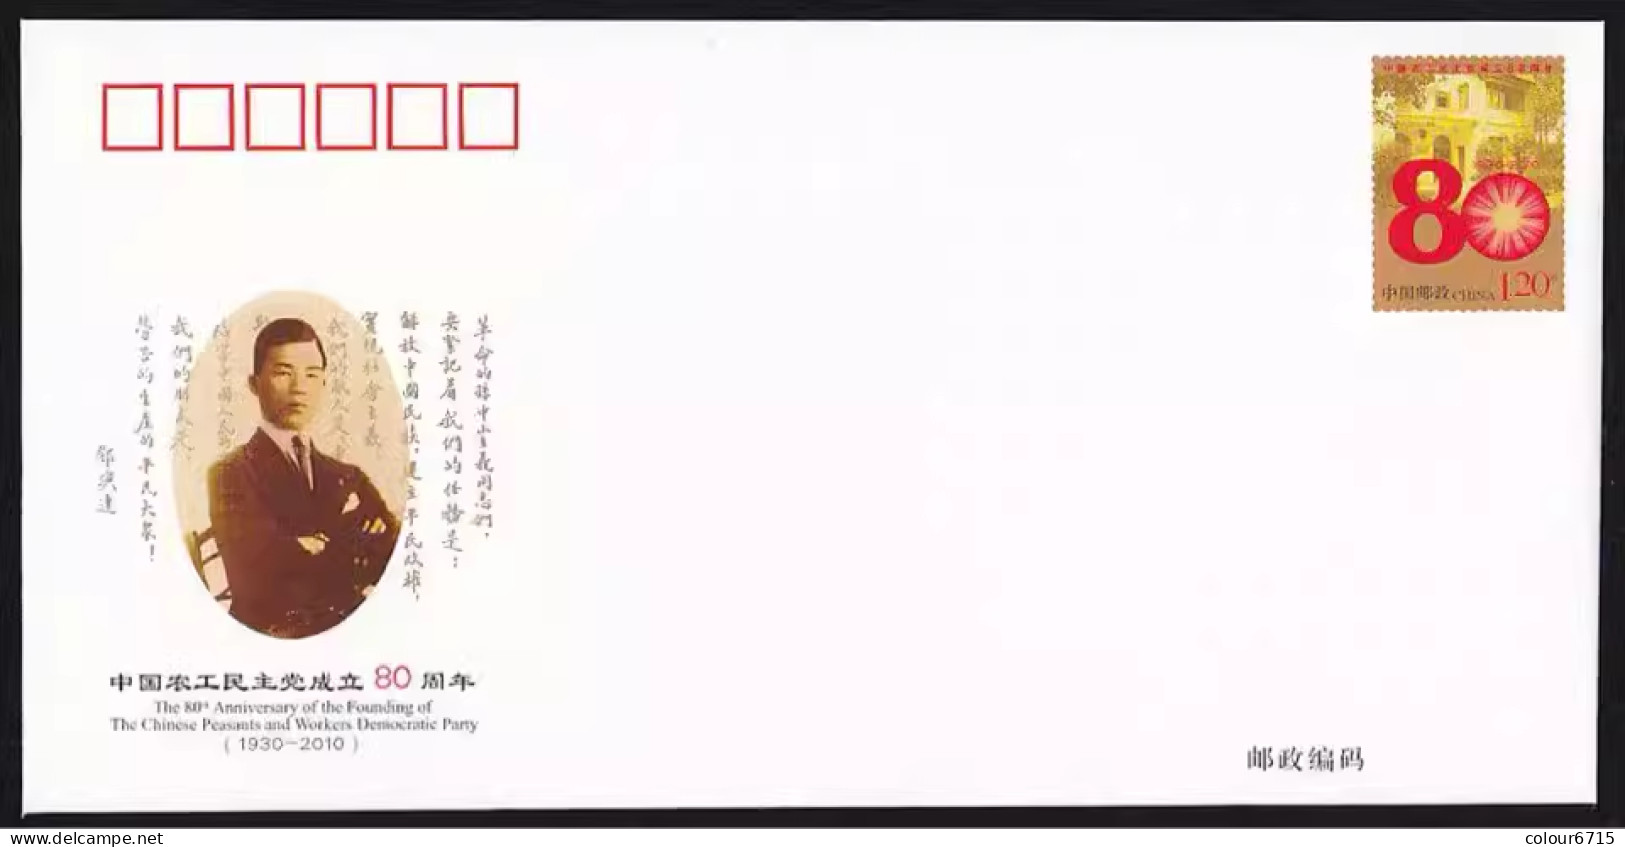 China Postal Cover 2010/JF97 The The 80th Anniversary Of Chinese Peasants And Workers Democratic Party 1v MNH - Covers